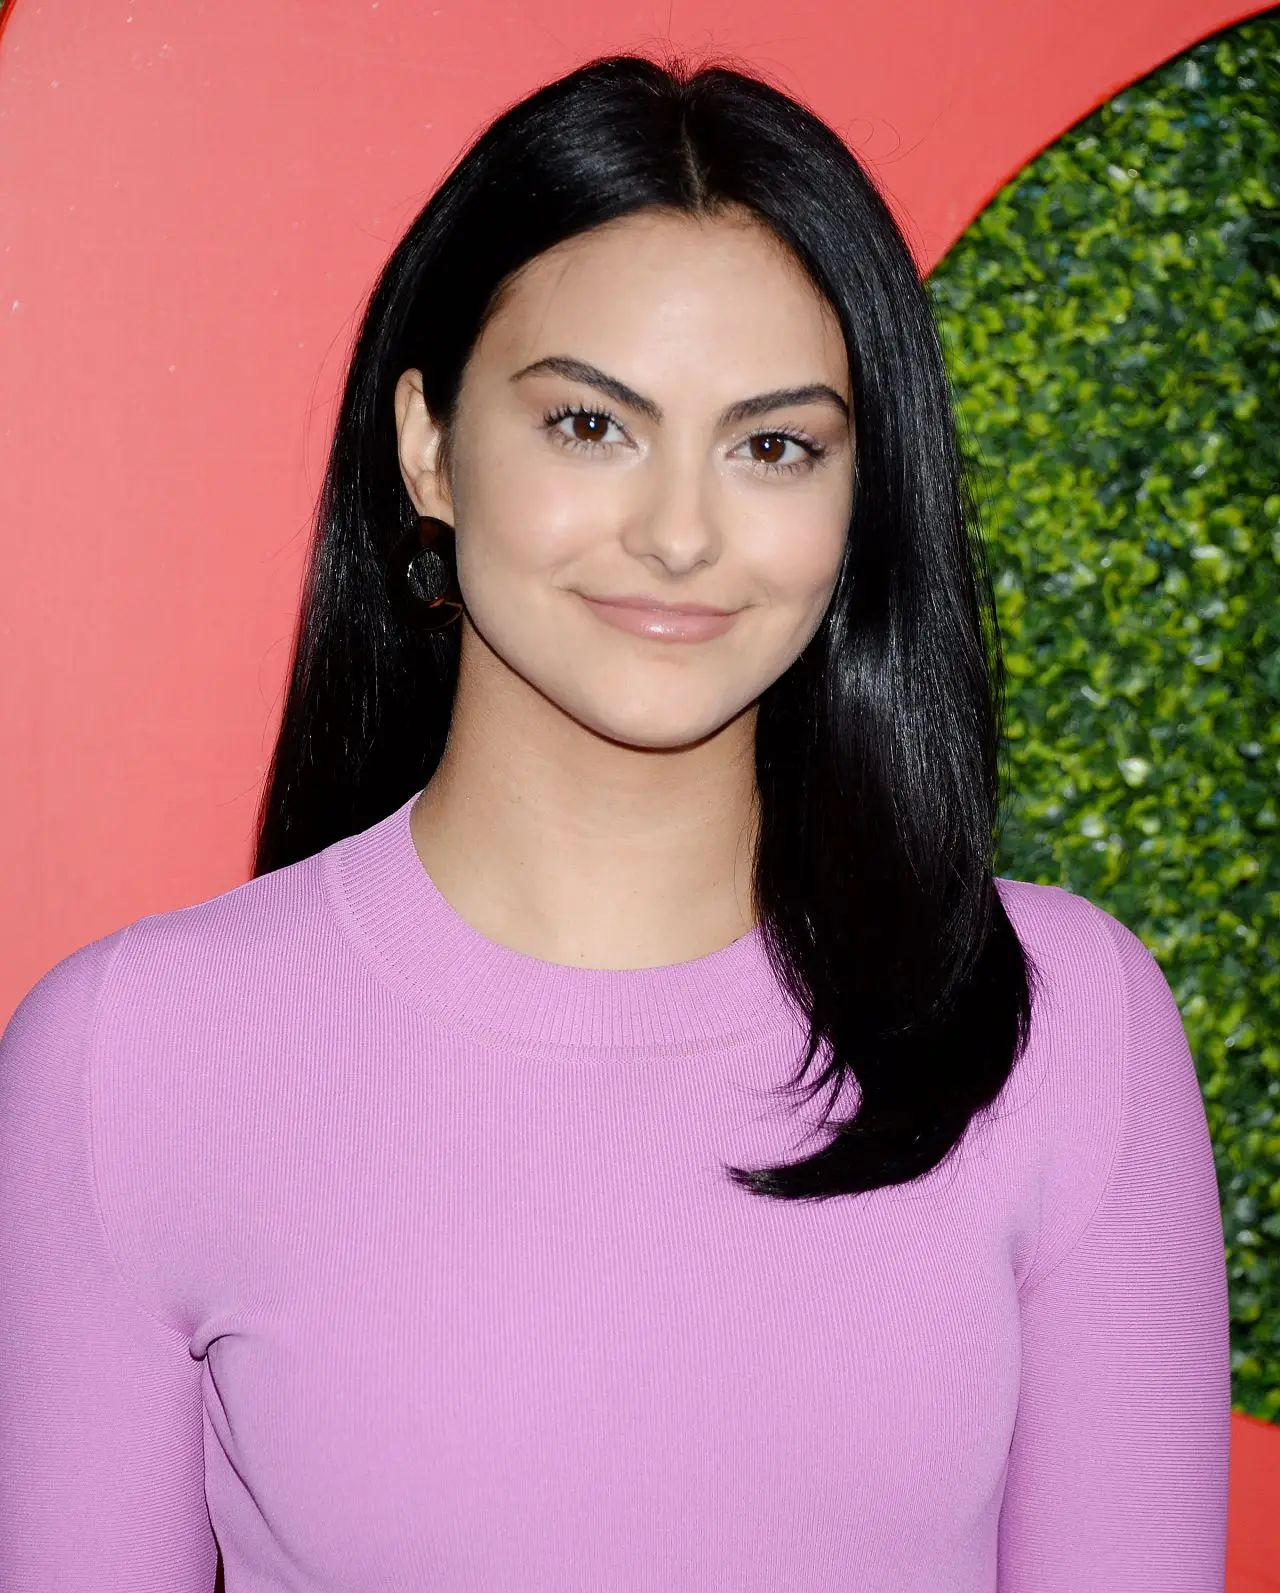 CAMILA MENDES AT 2018 GQ MEN OF THE YEAR PARTY IN LOS ANGELES4